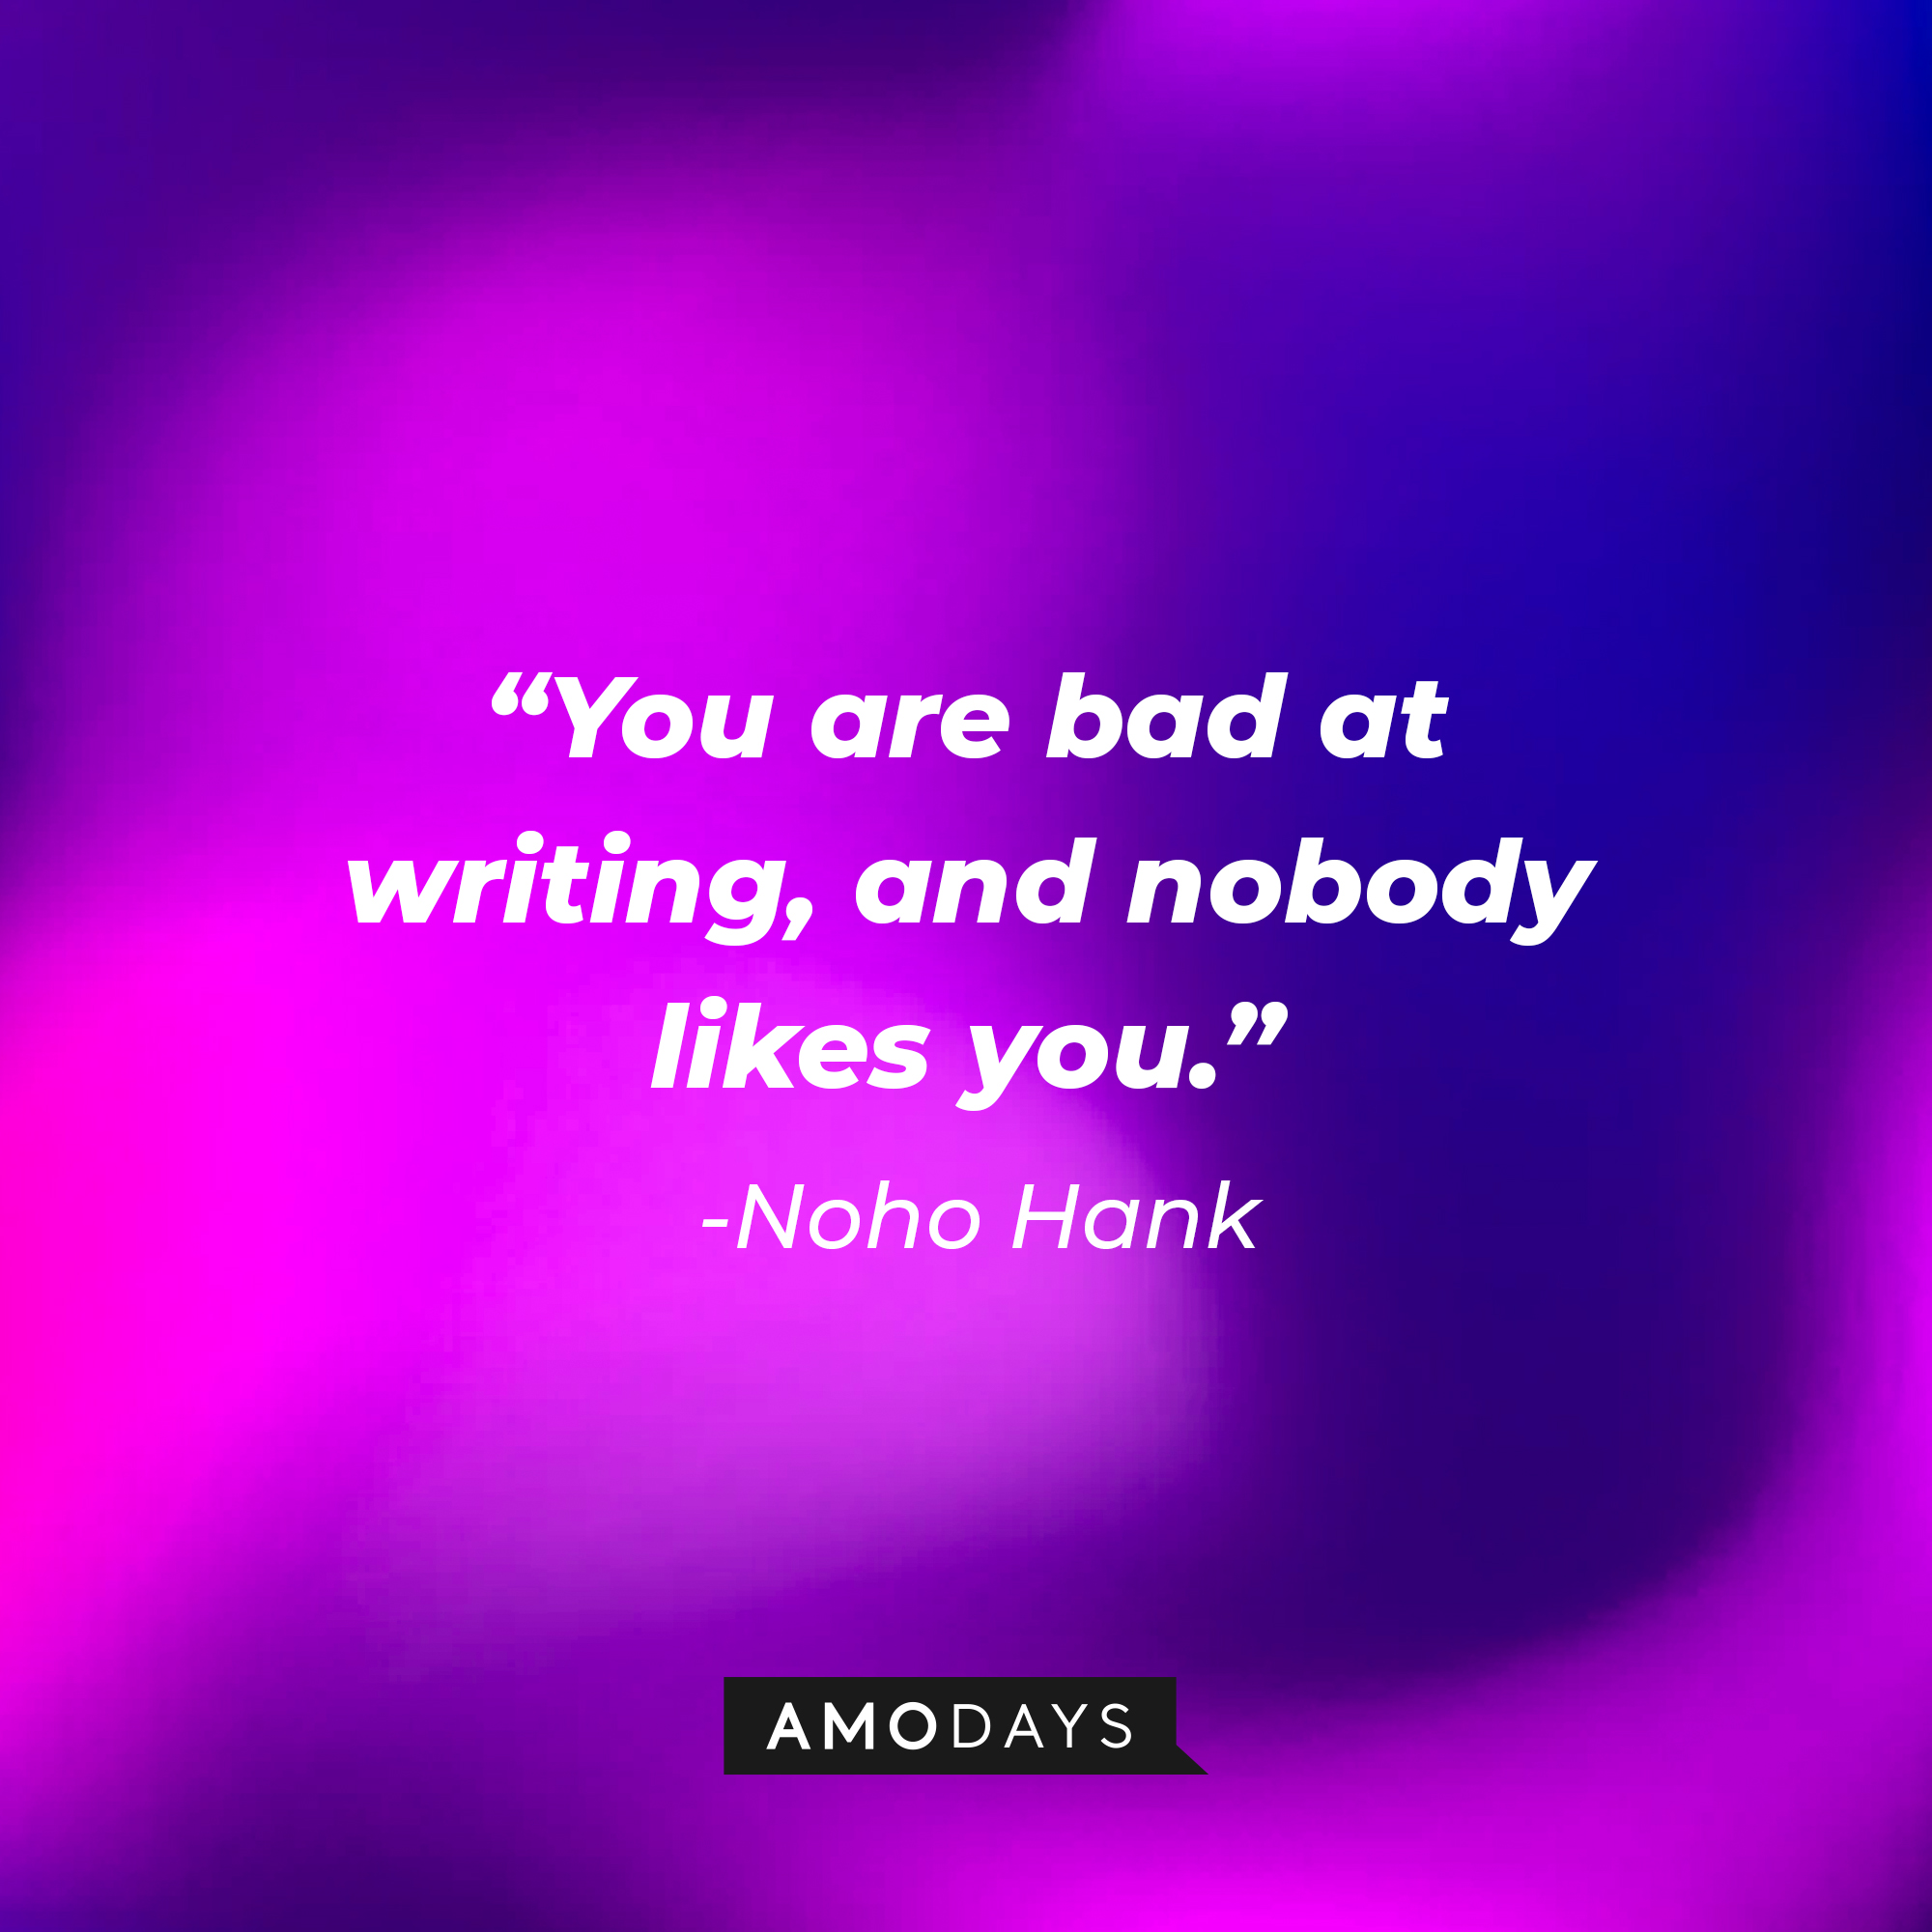 NoHo Hank's quote, “You are bad at writing, and nobody likes you.” | Source: AmoDays